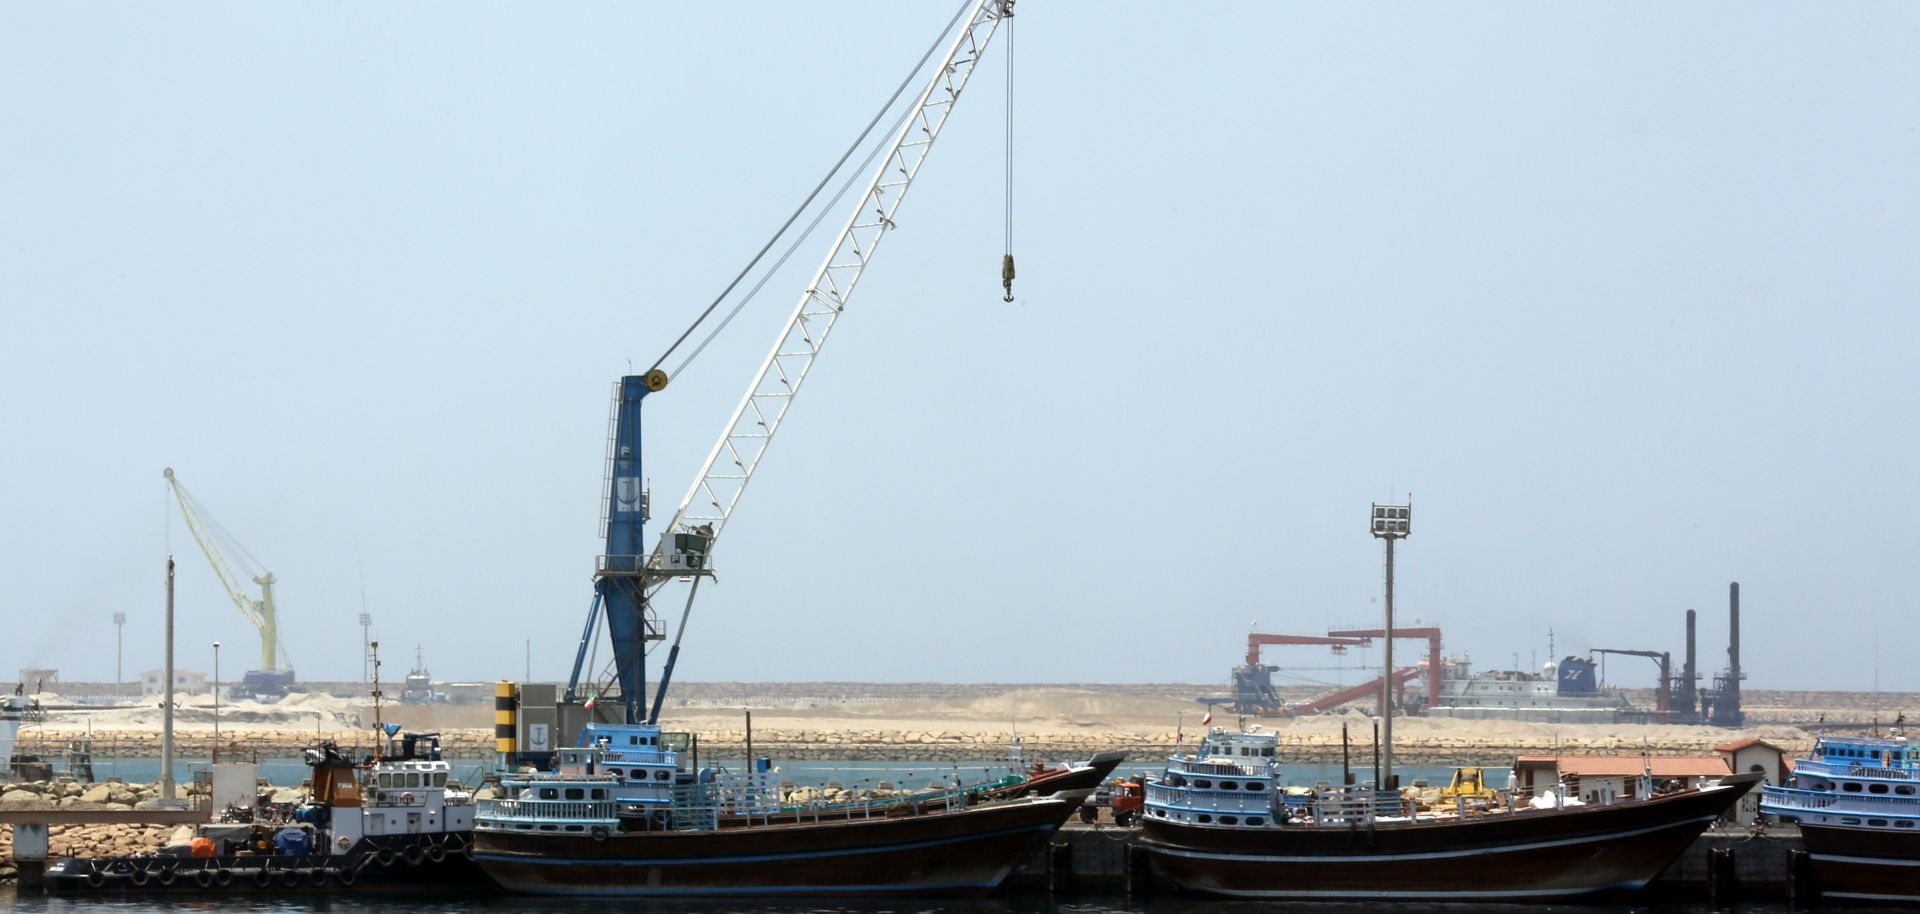 A port project in the city of Chabahar on the Gulf of Oman is a big opportunity, not only for Iran but also for Afghanistan.